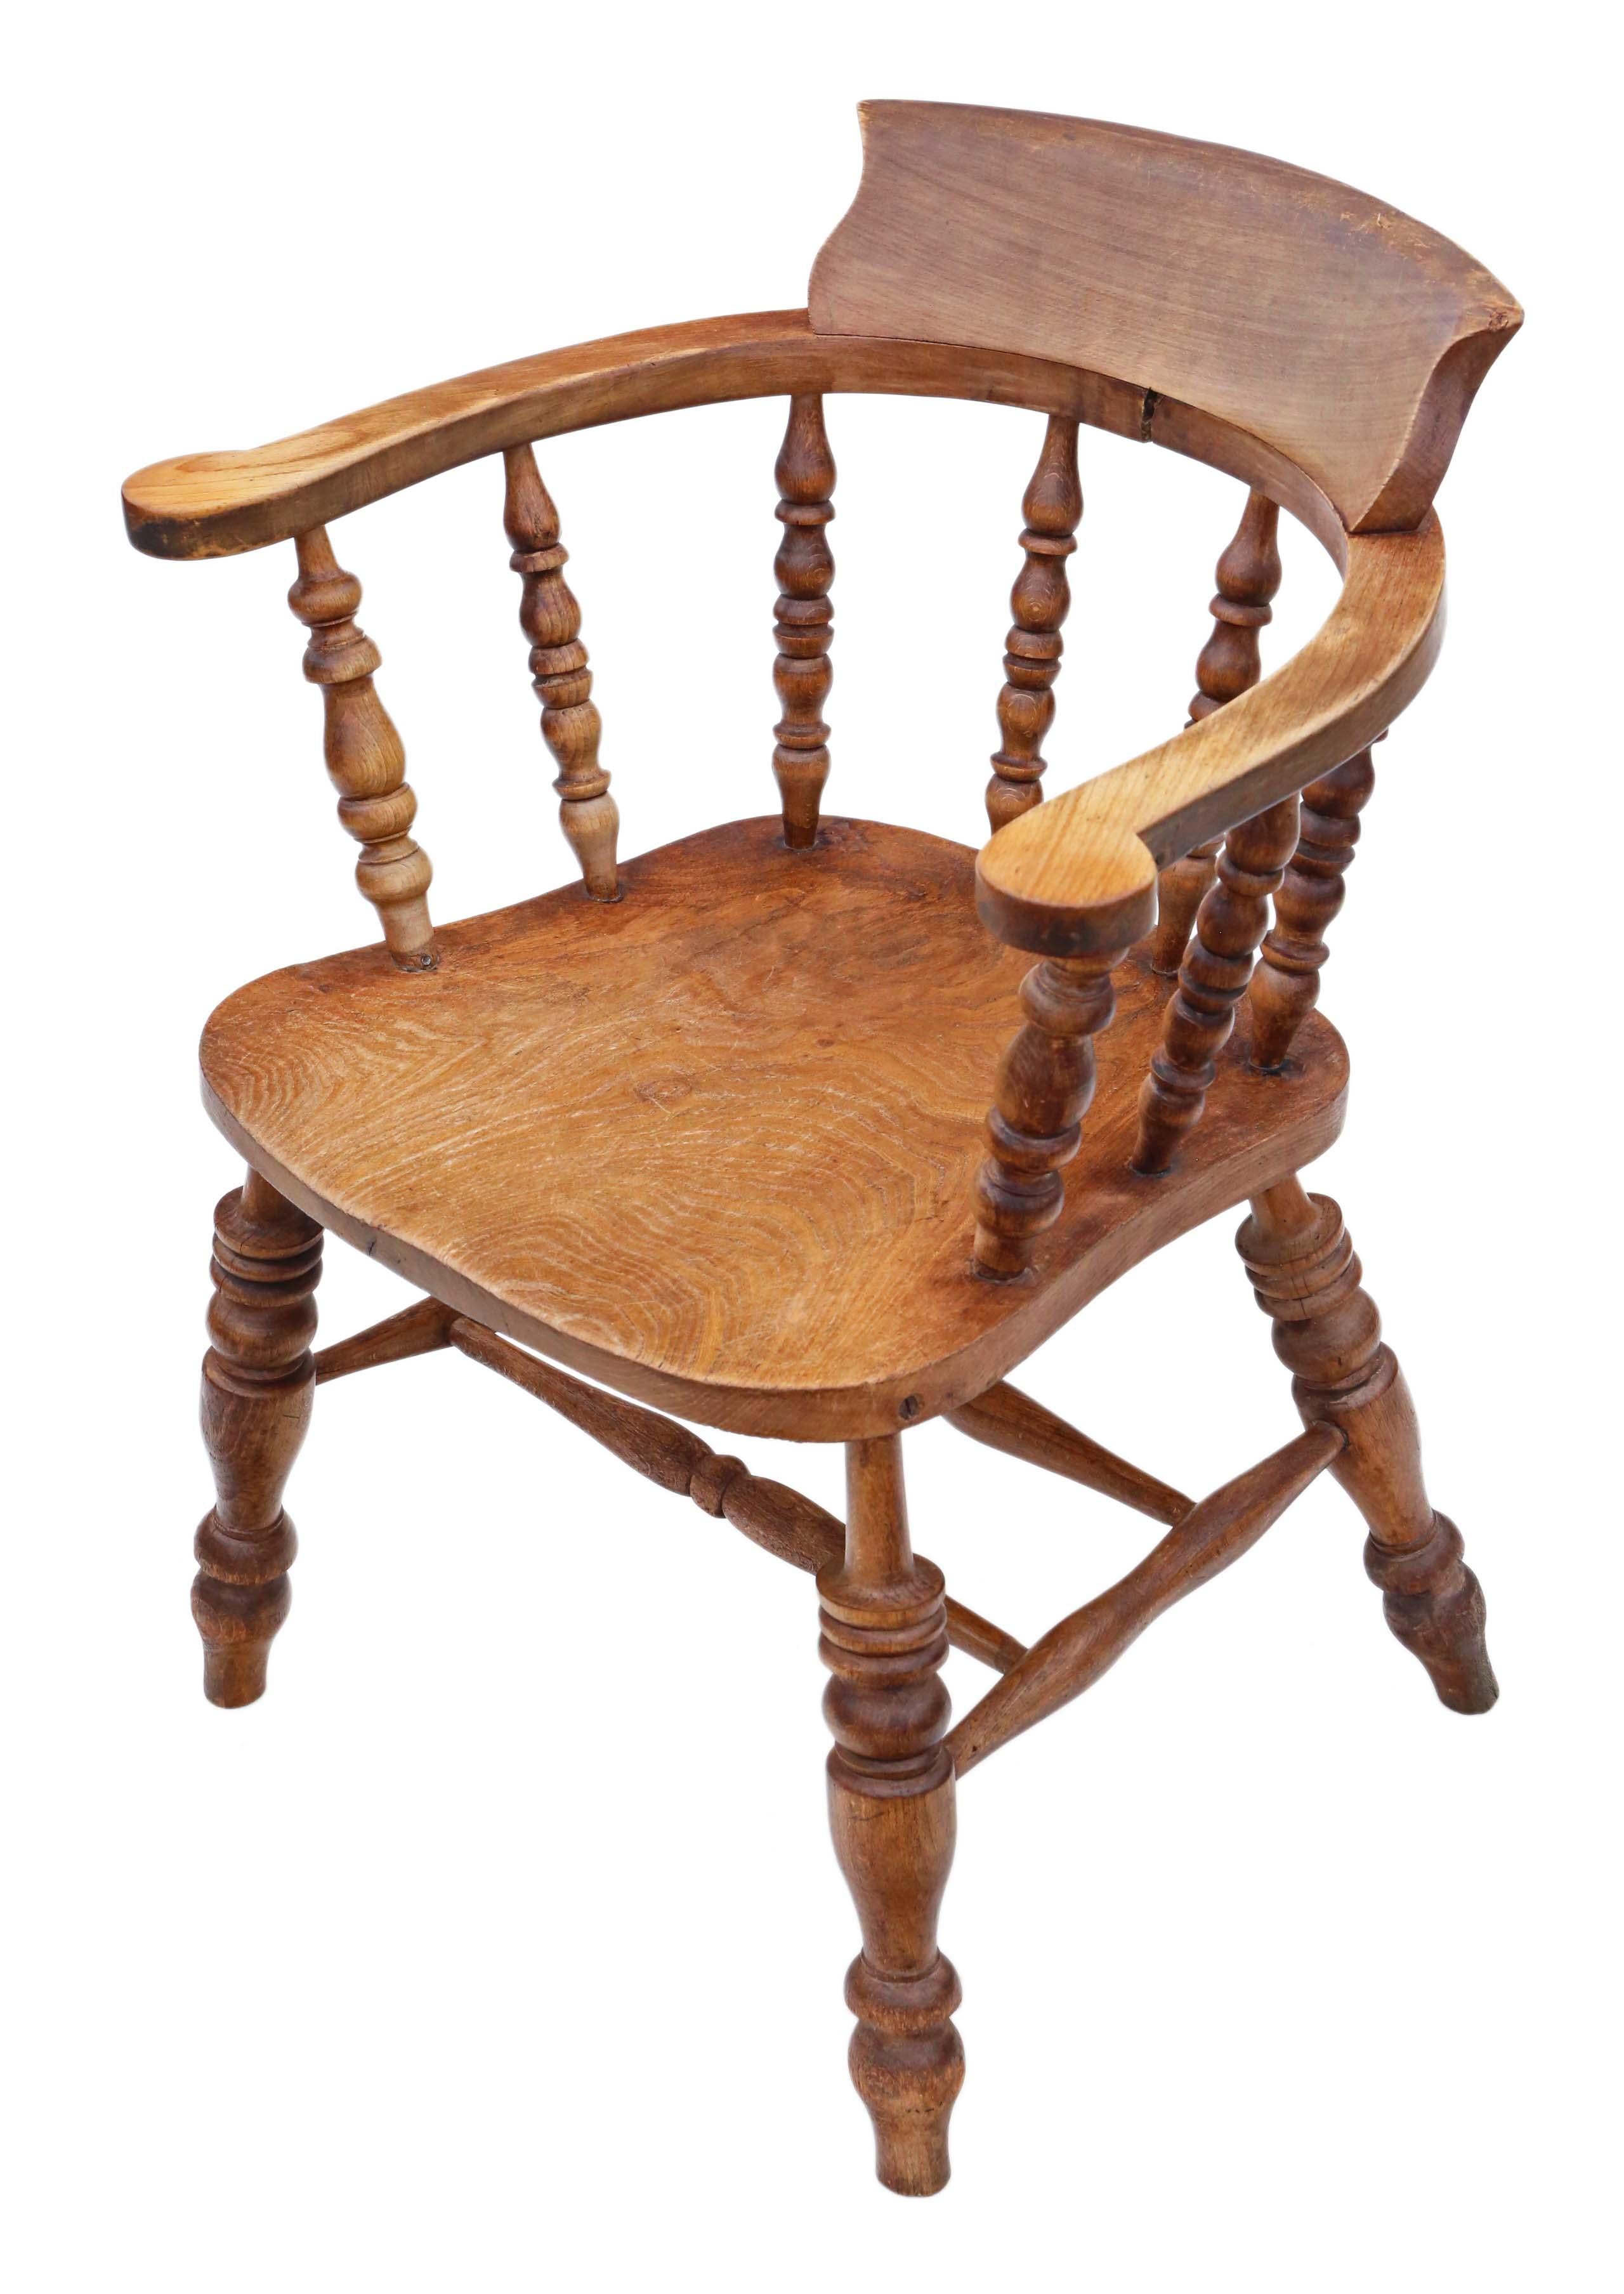 Antique Elm and Beech Bow Armchair Elbow Desk Chair Victorian In Good Condition For Sale In Wisbech, Cambridgeshire